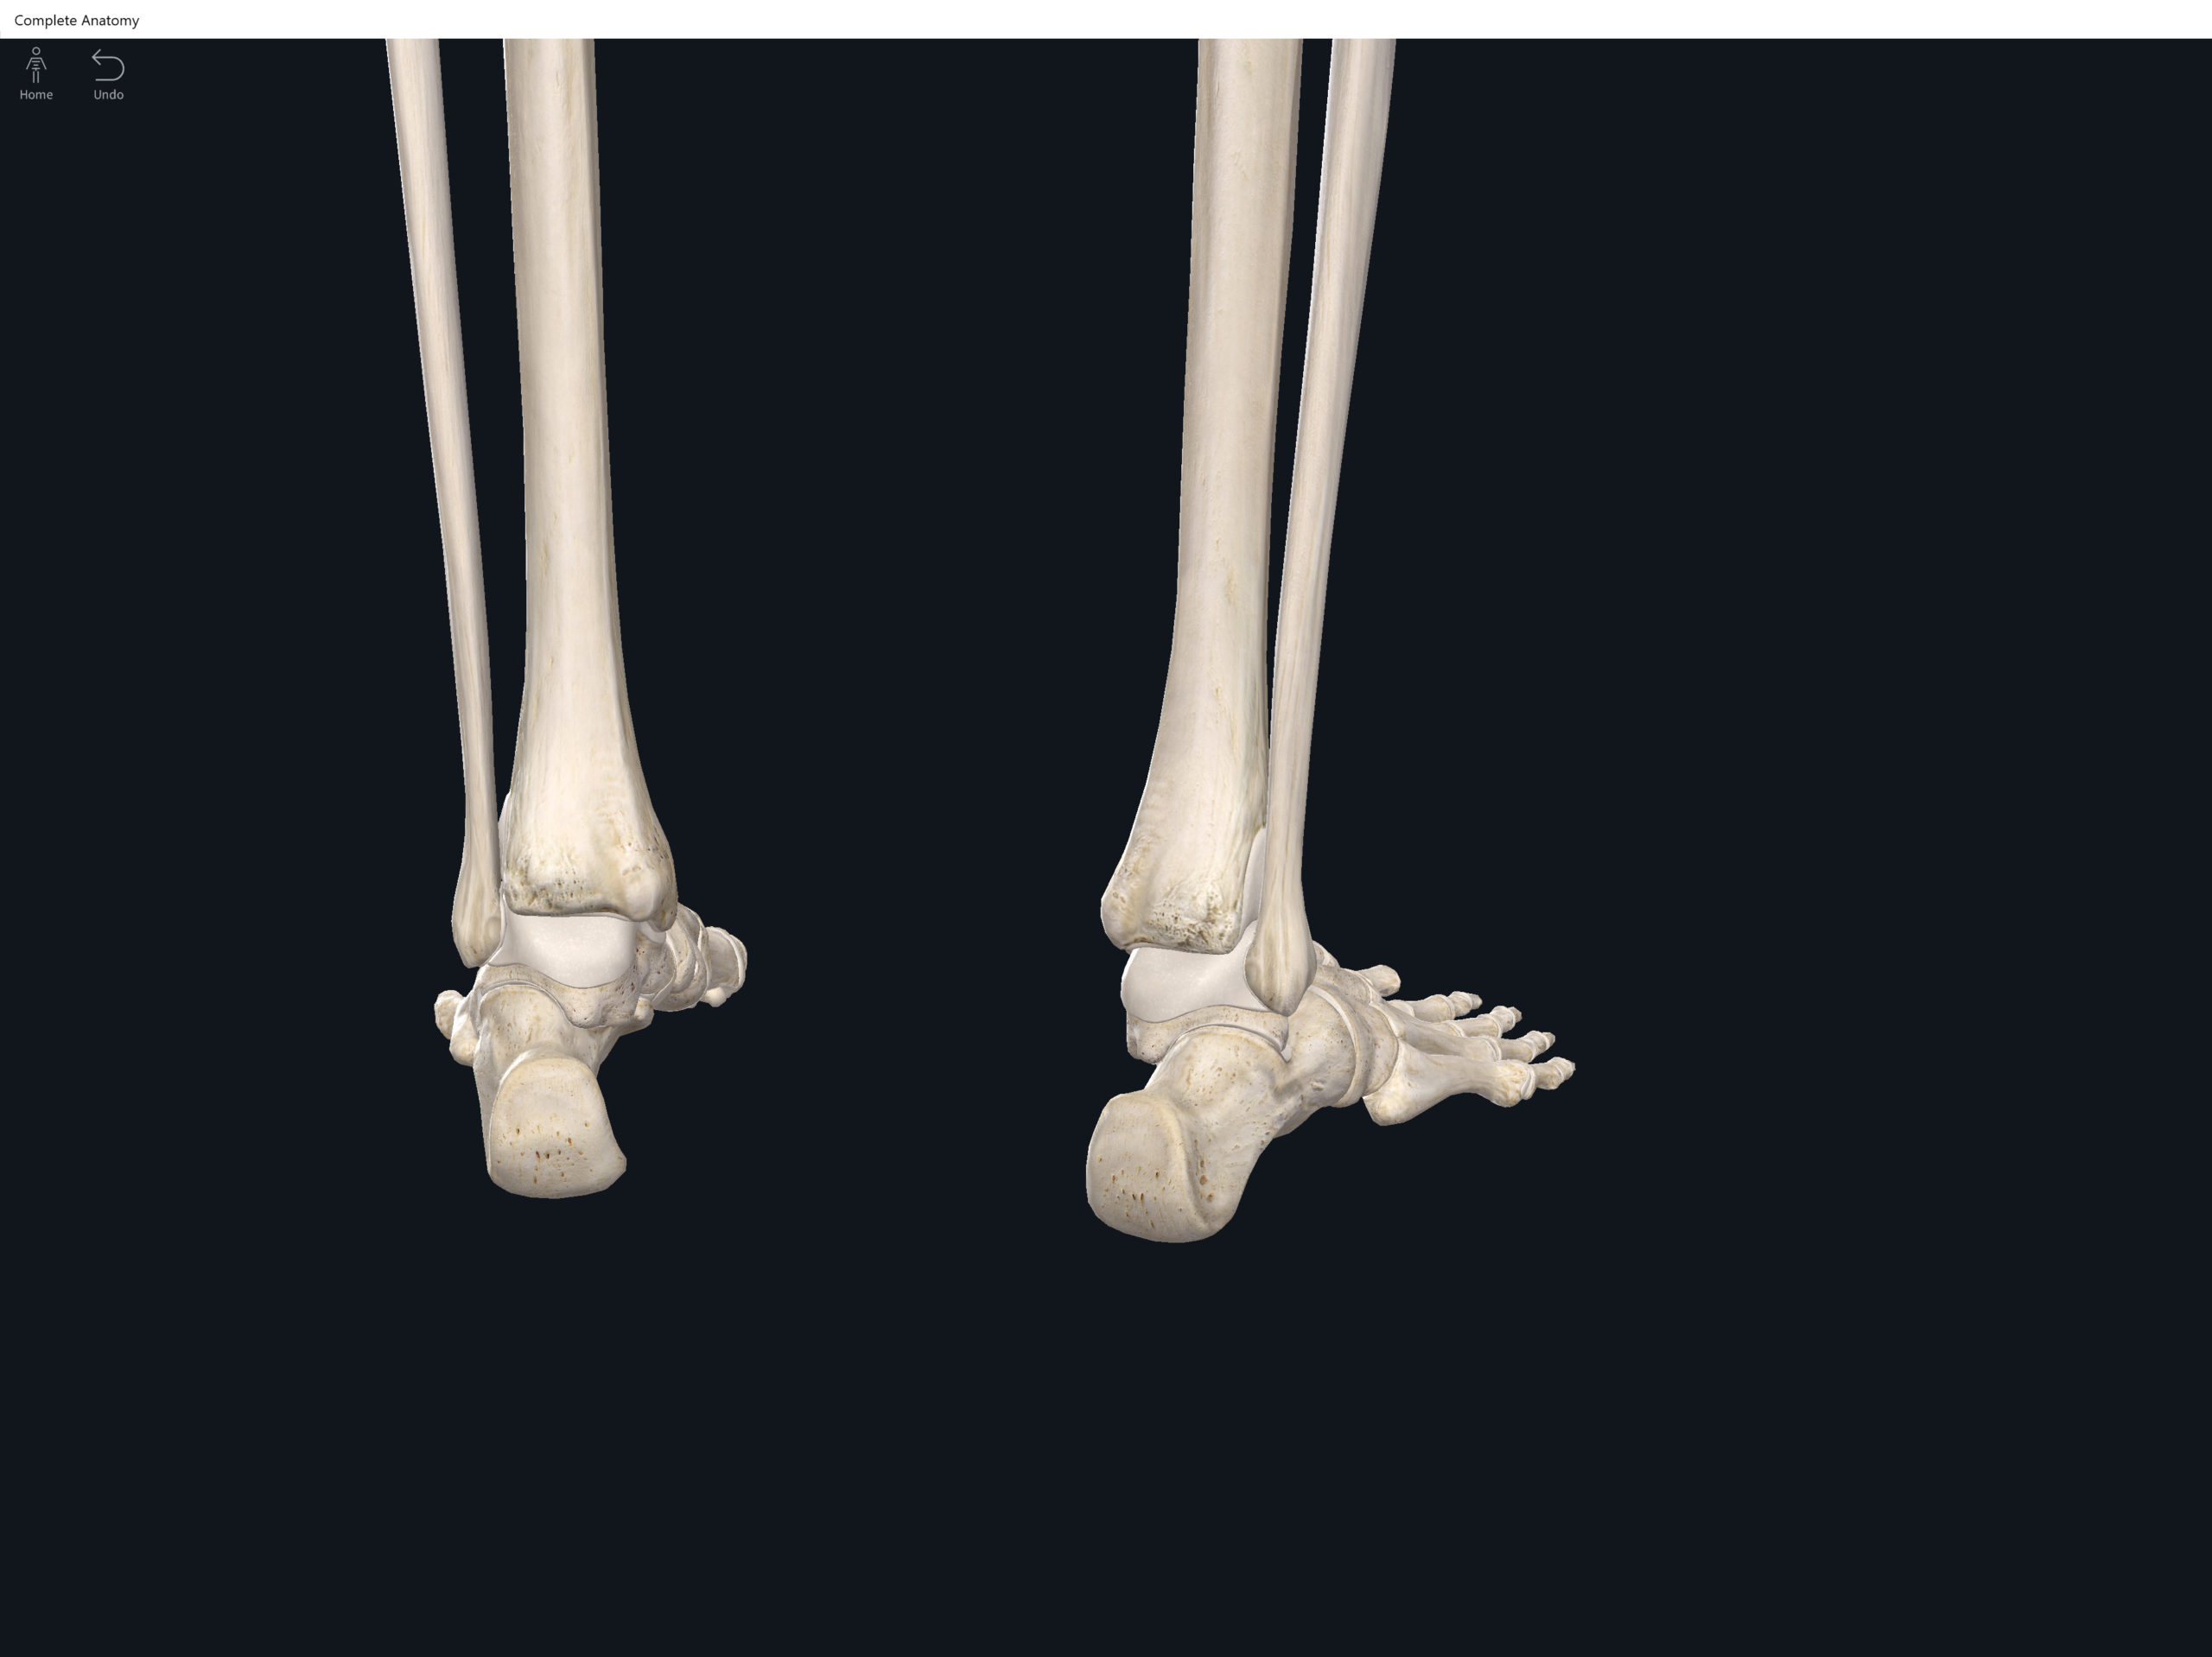 Bones: Foot and Ankle. – Anatomy & Physiology